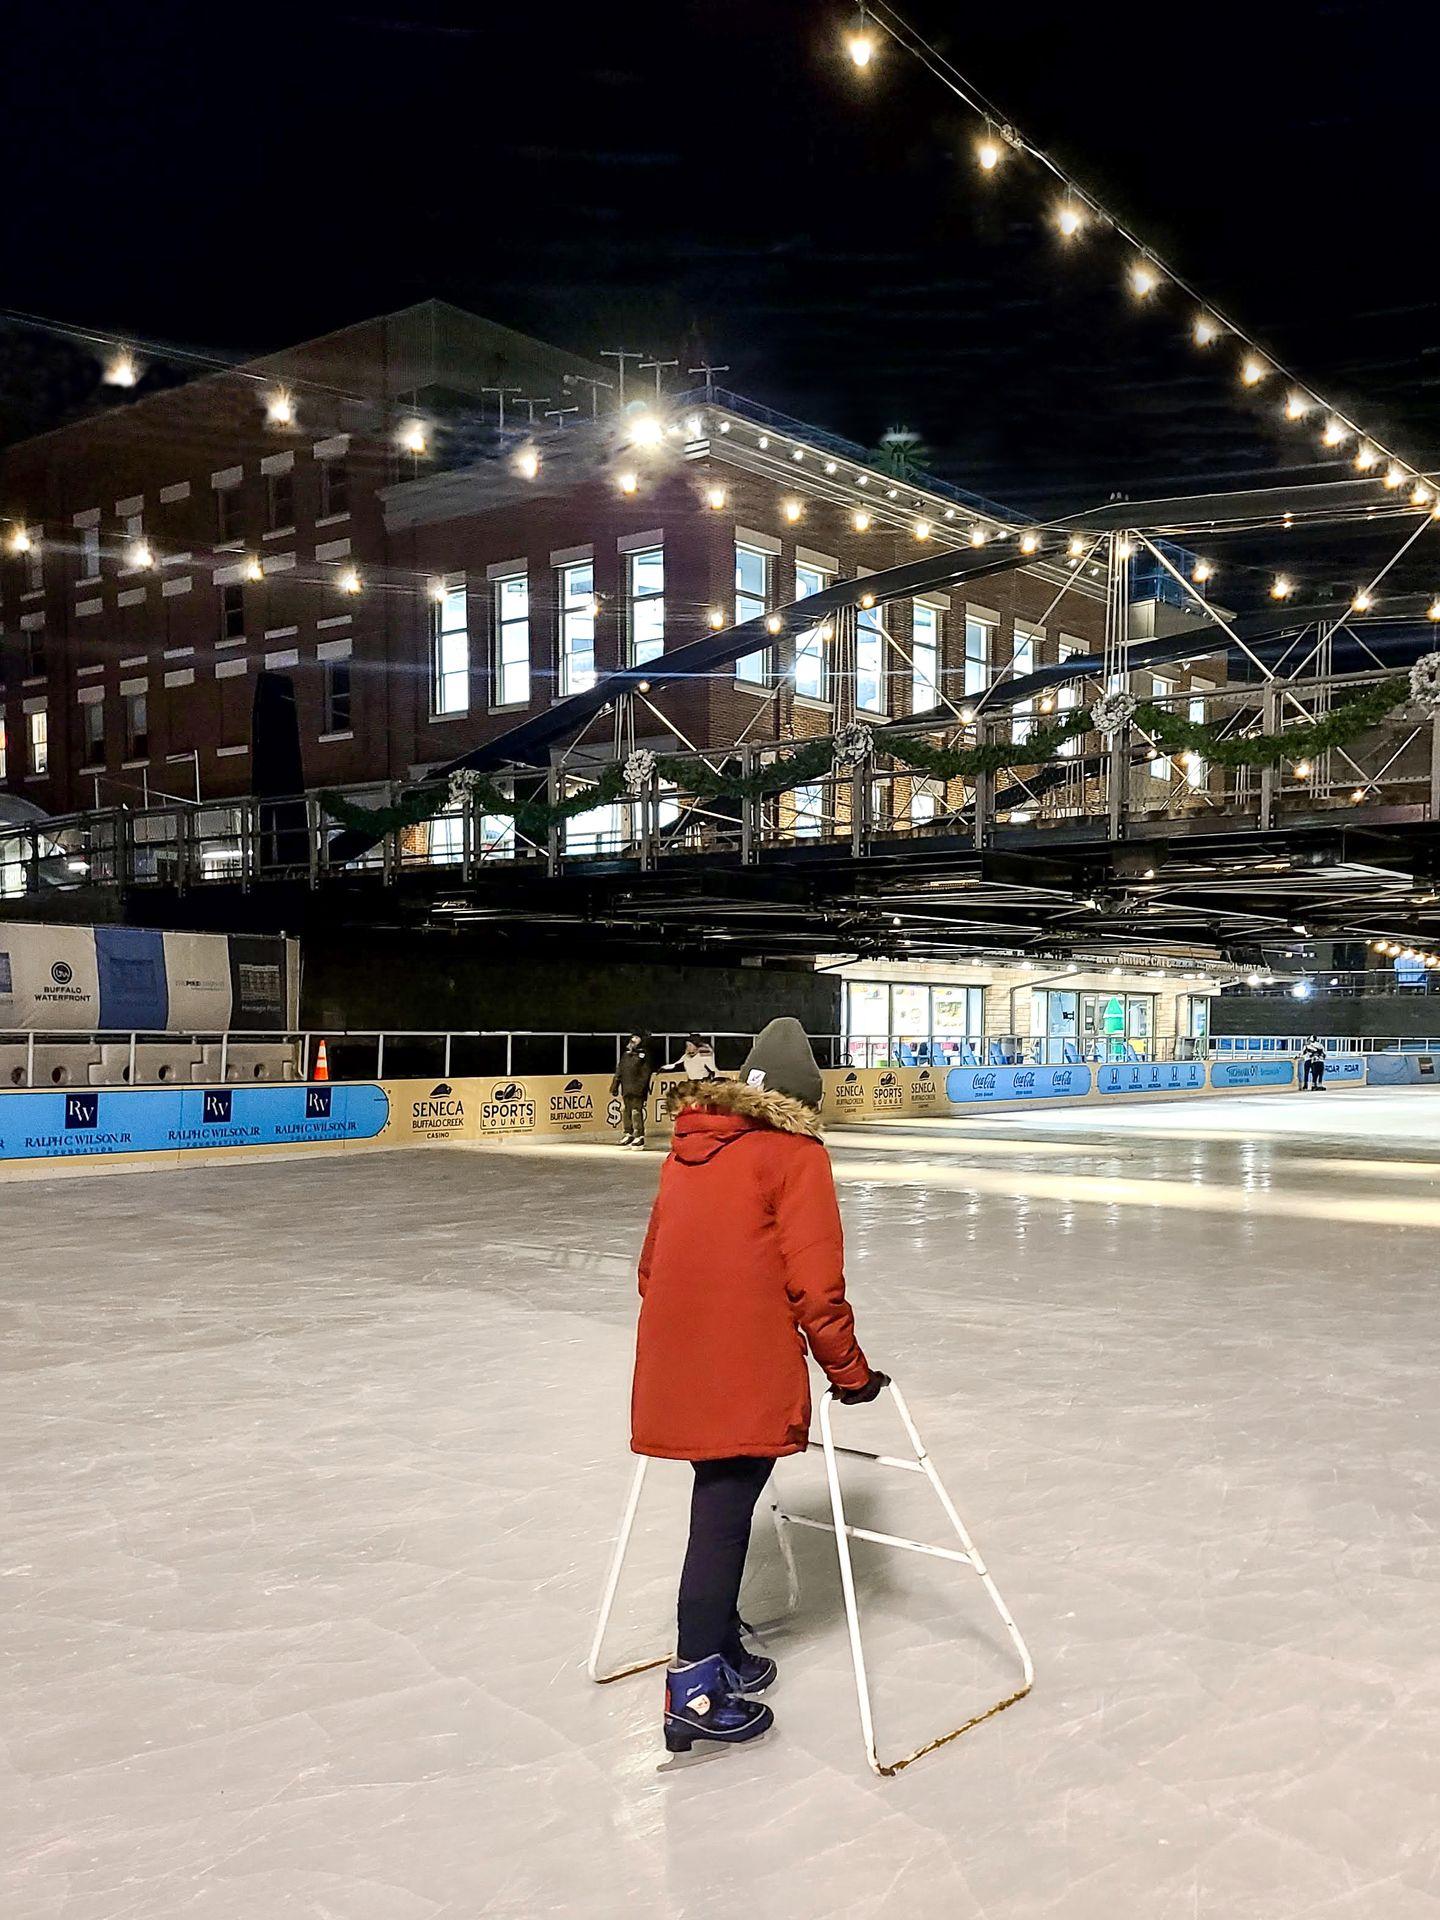 Lydia ice skating using a walker. There are hanging lights and a bridge above the rink. Lydia wears a red coat and green hat.